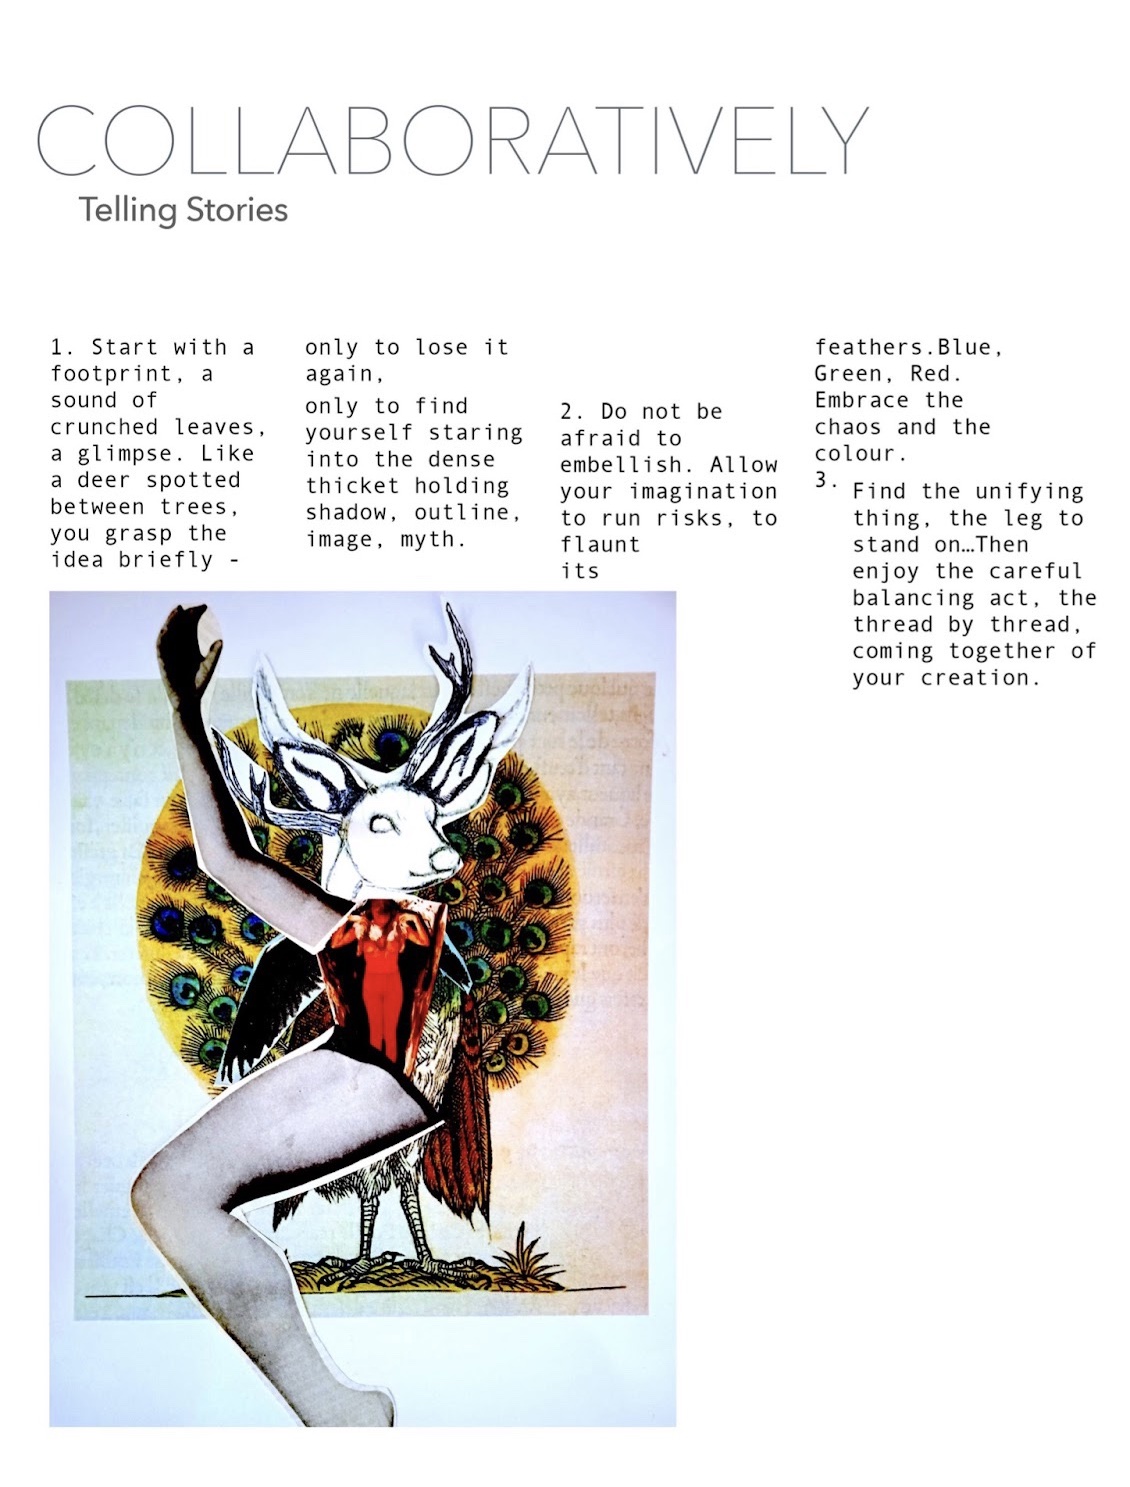 Titled Collaboratively Telling Stories, the next five images were created by Redzi Bernard and Phoebe McIndoe, combining an essay with collage. This first page features an image of a figure, built from a human arm, torso and leg with the head of a stag. Behind the figure a peacocks feathers bloom like a radiant golden halo. The text reads: 1. Start with a footprint, a sound of crunched leaves, a glimpse. Like a deer spotted between trees, you grasp the idea briefly - only to lose it again, only to find yourself staring into the dense thicket holding shadow, outline, image, myth. 2. Do not be afraid to embellish. Allow your imagination to run risks, to flaunt its feathers. Blue, green, red. Embrace the chaos and the colour. 3. Find the unifying thing, the leg to stand on… Then enjoy the careful balancing act, the thread by thread, coming together of your creation.